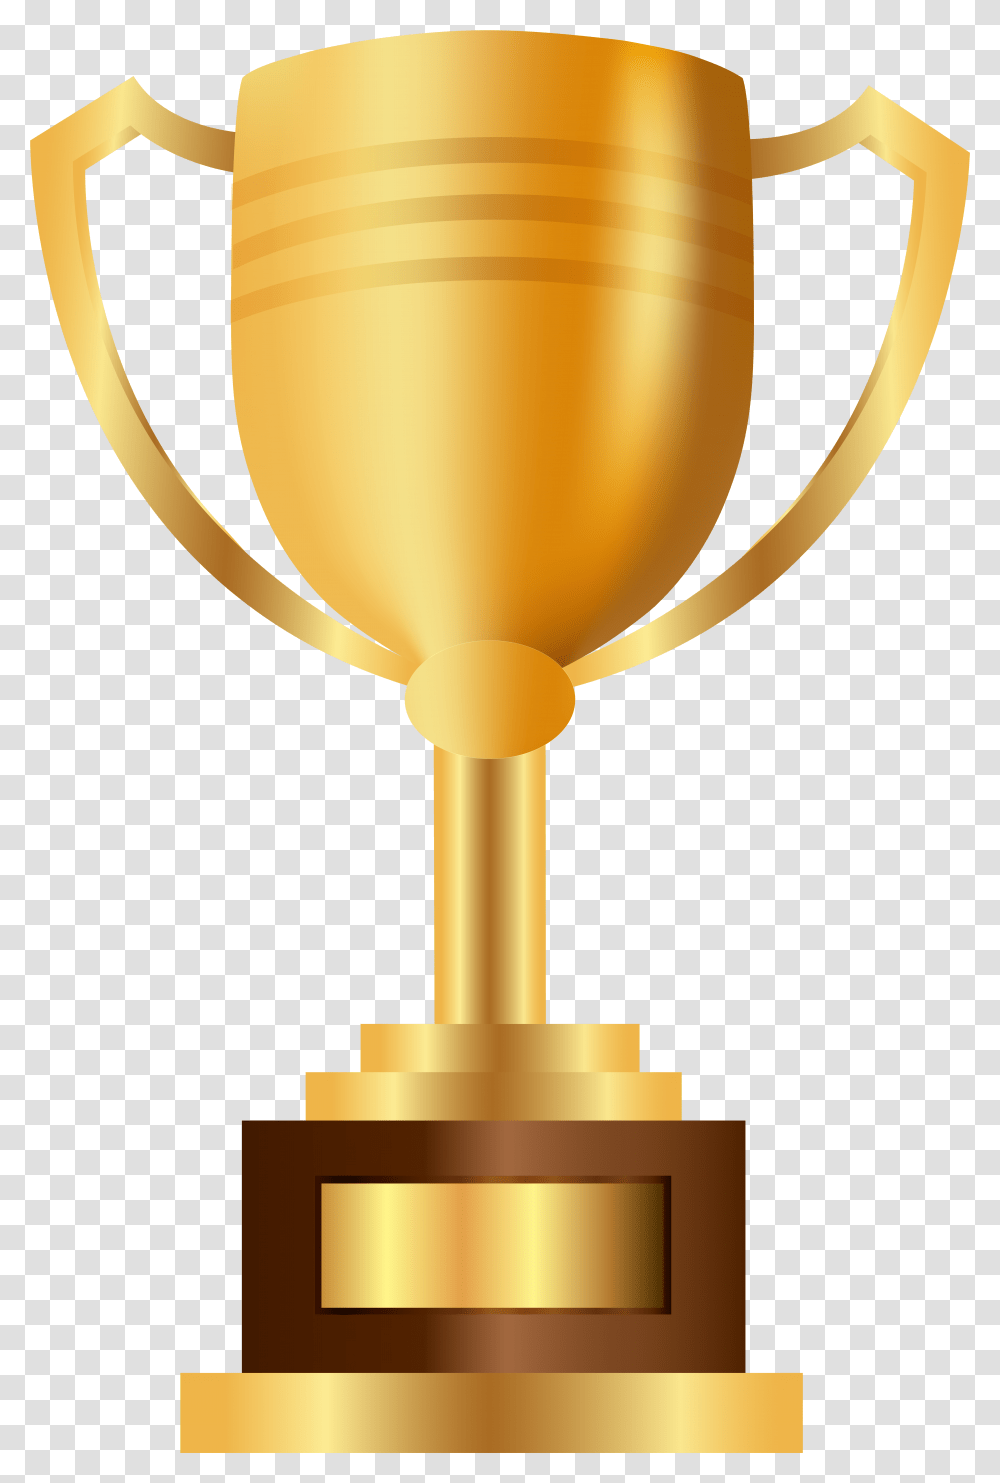 Collection Of Free Trophy Drawing Prizes On Prize Clipart, Lamp Transparent Png